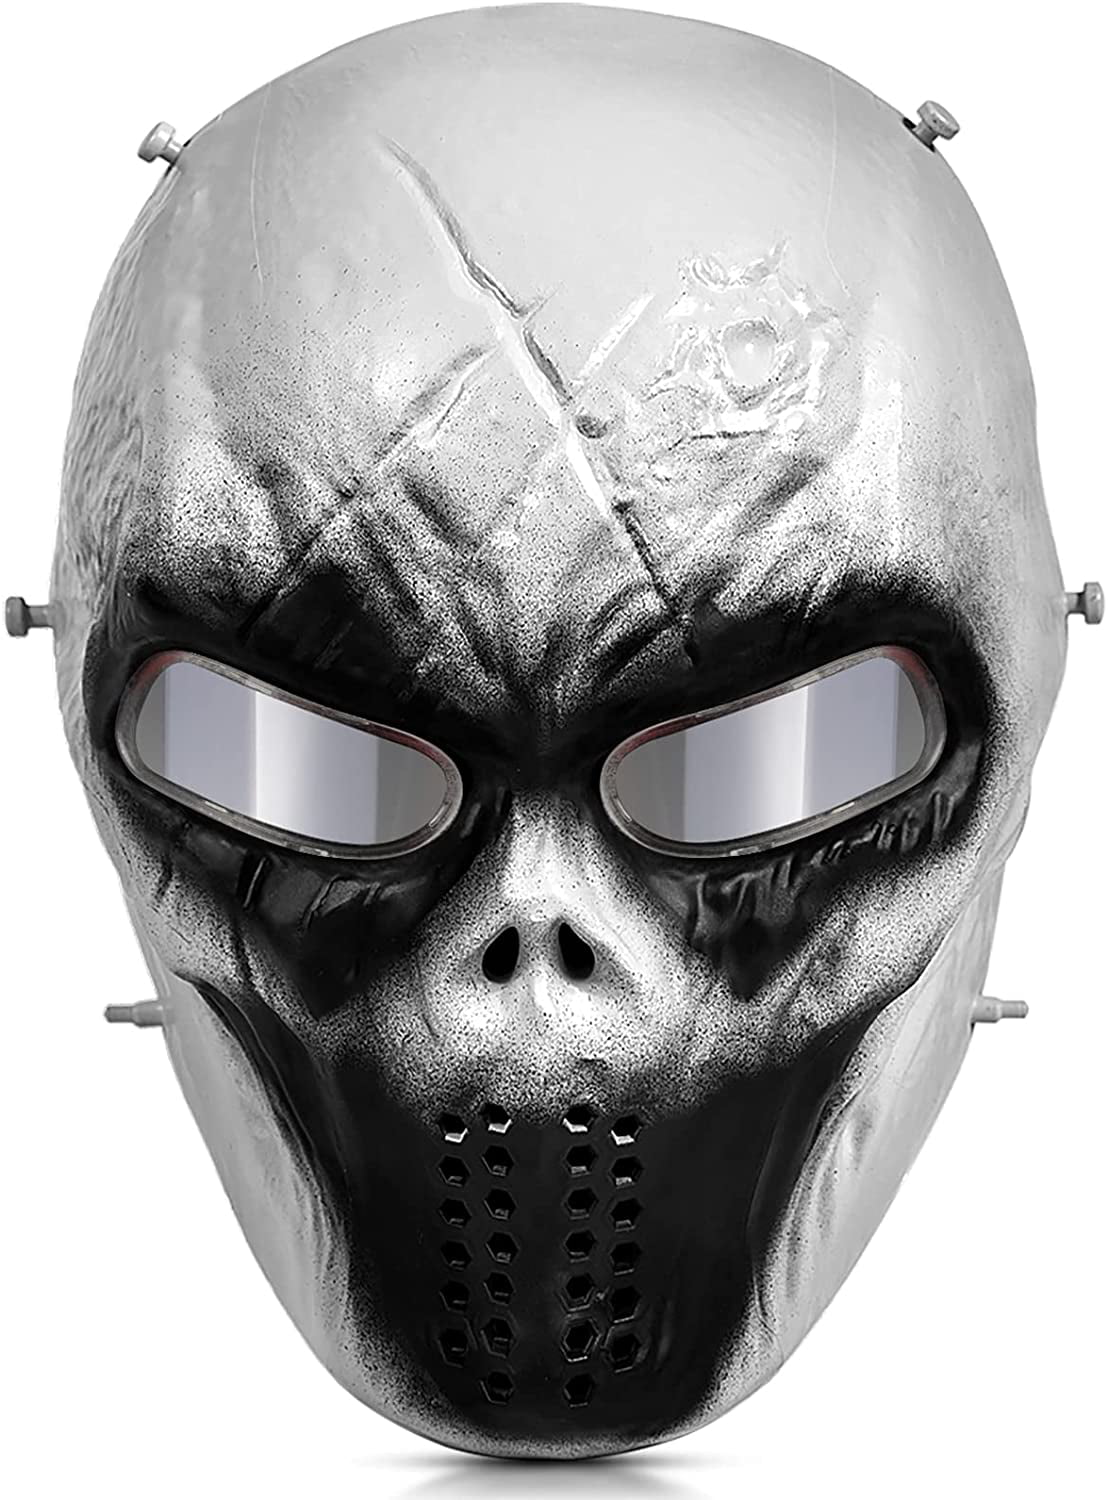 Full Mask 18 iMeshbean Airsoft Mask Full Face Airsoft Mask with Metal Mesh Eye Protection 